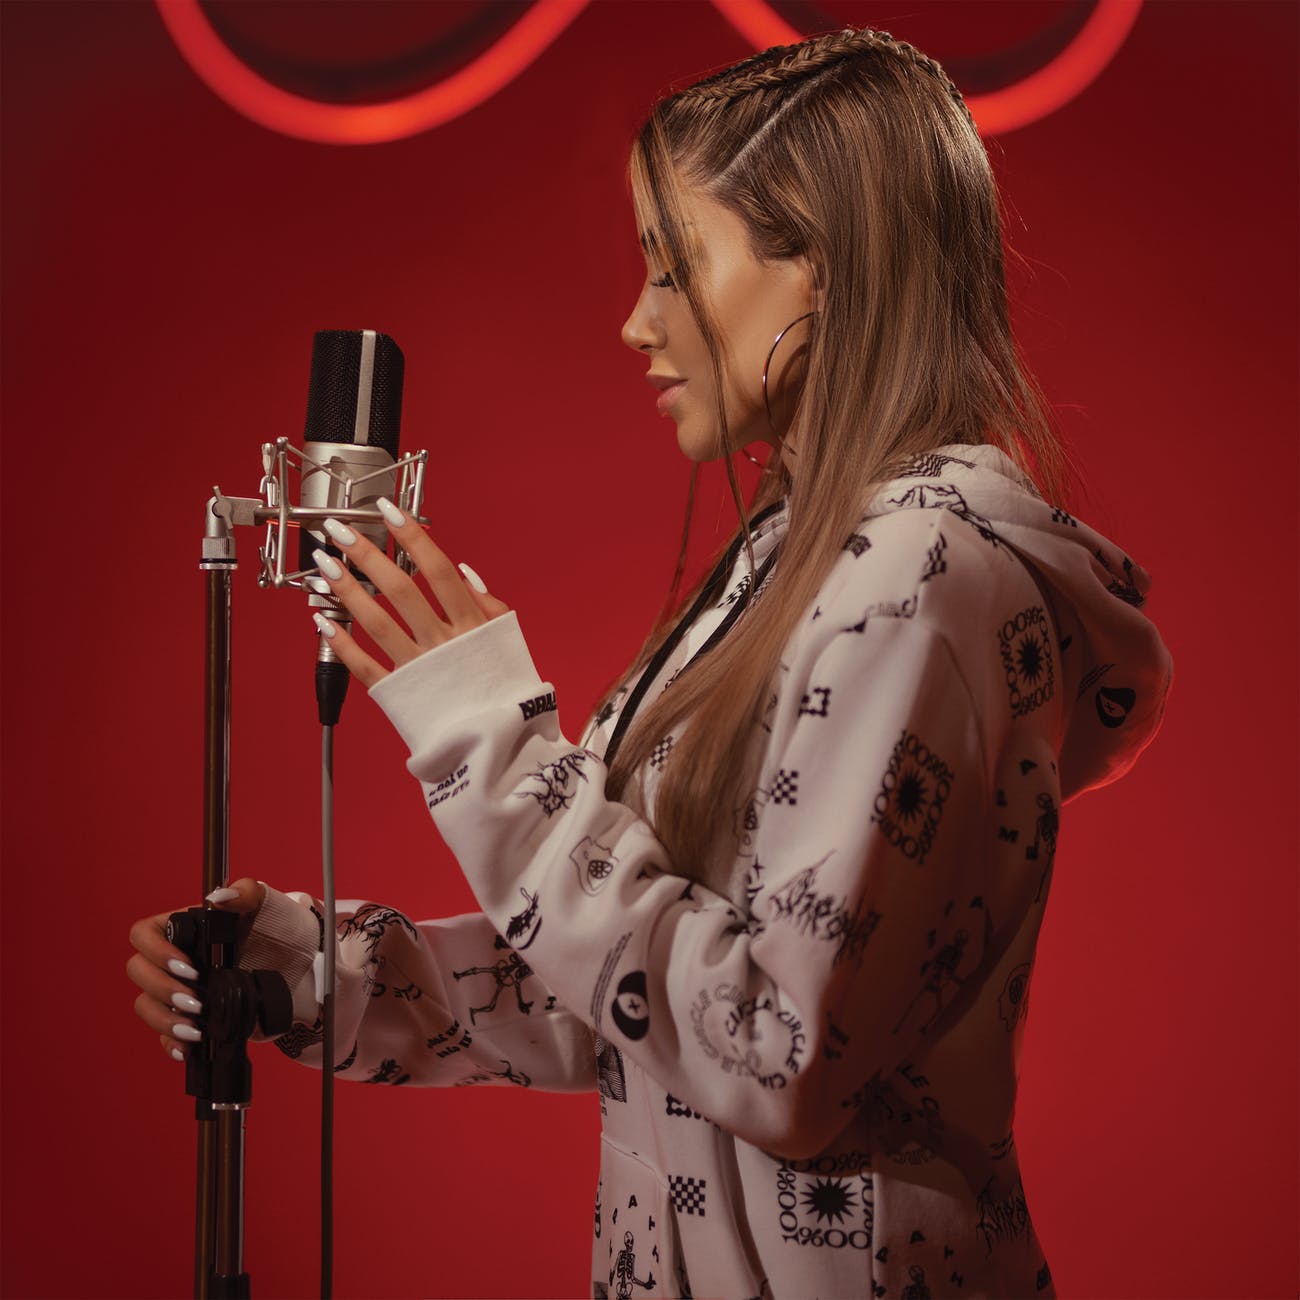 young woman with microphone against red background